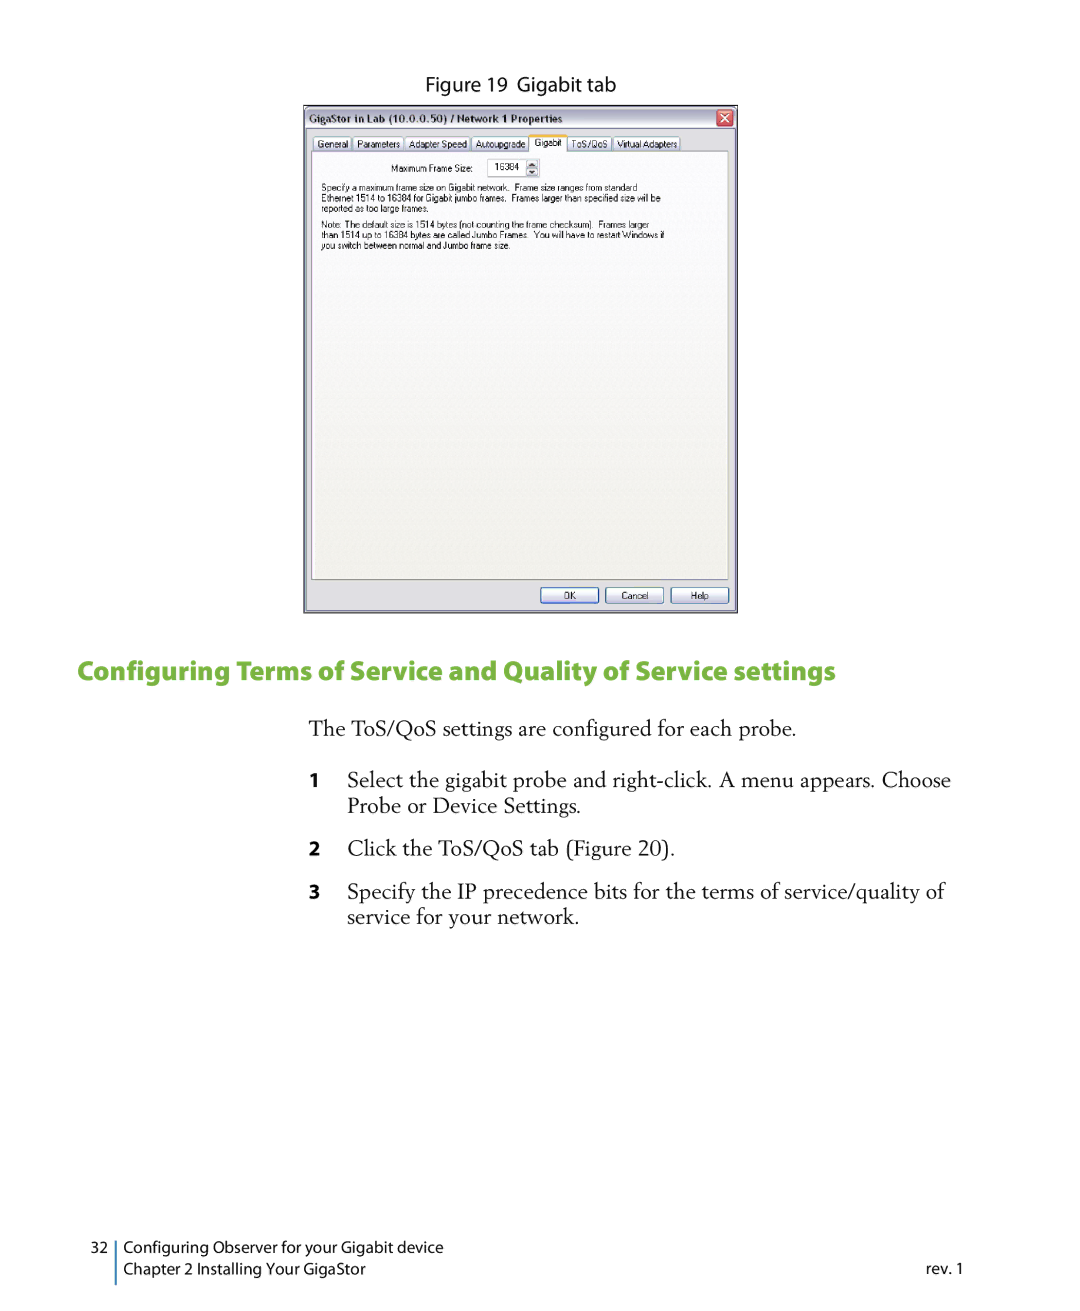 Network Instruments 114ff manual Configuring Terms of Service and Quality of Service settings 